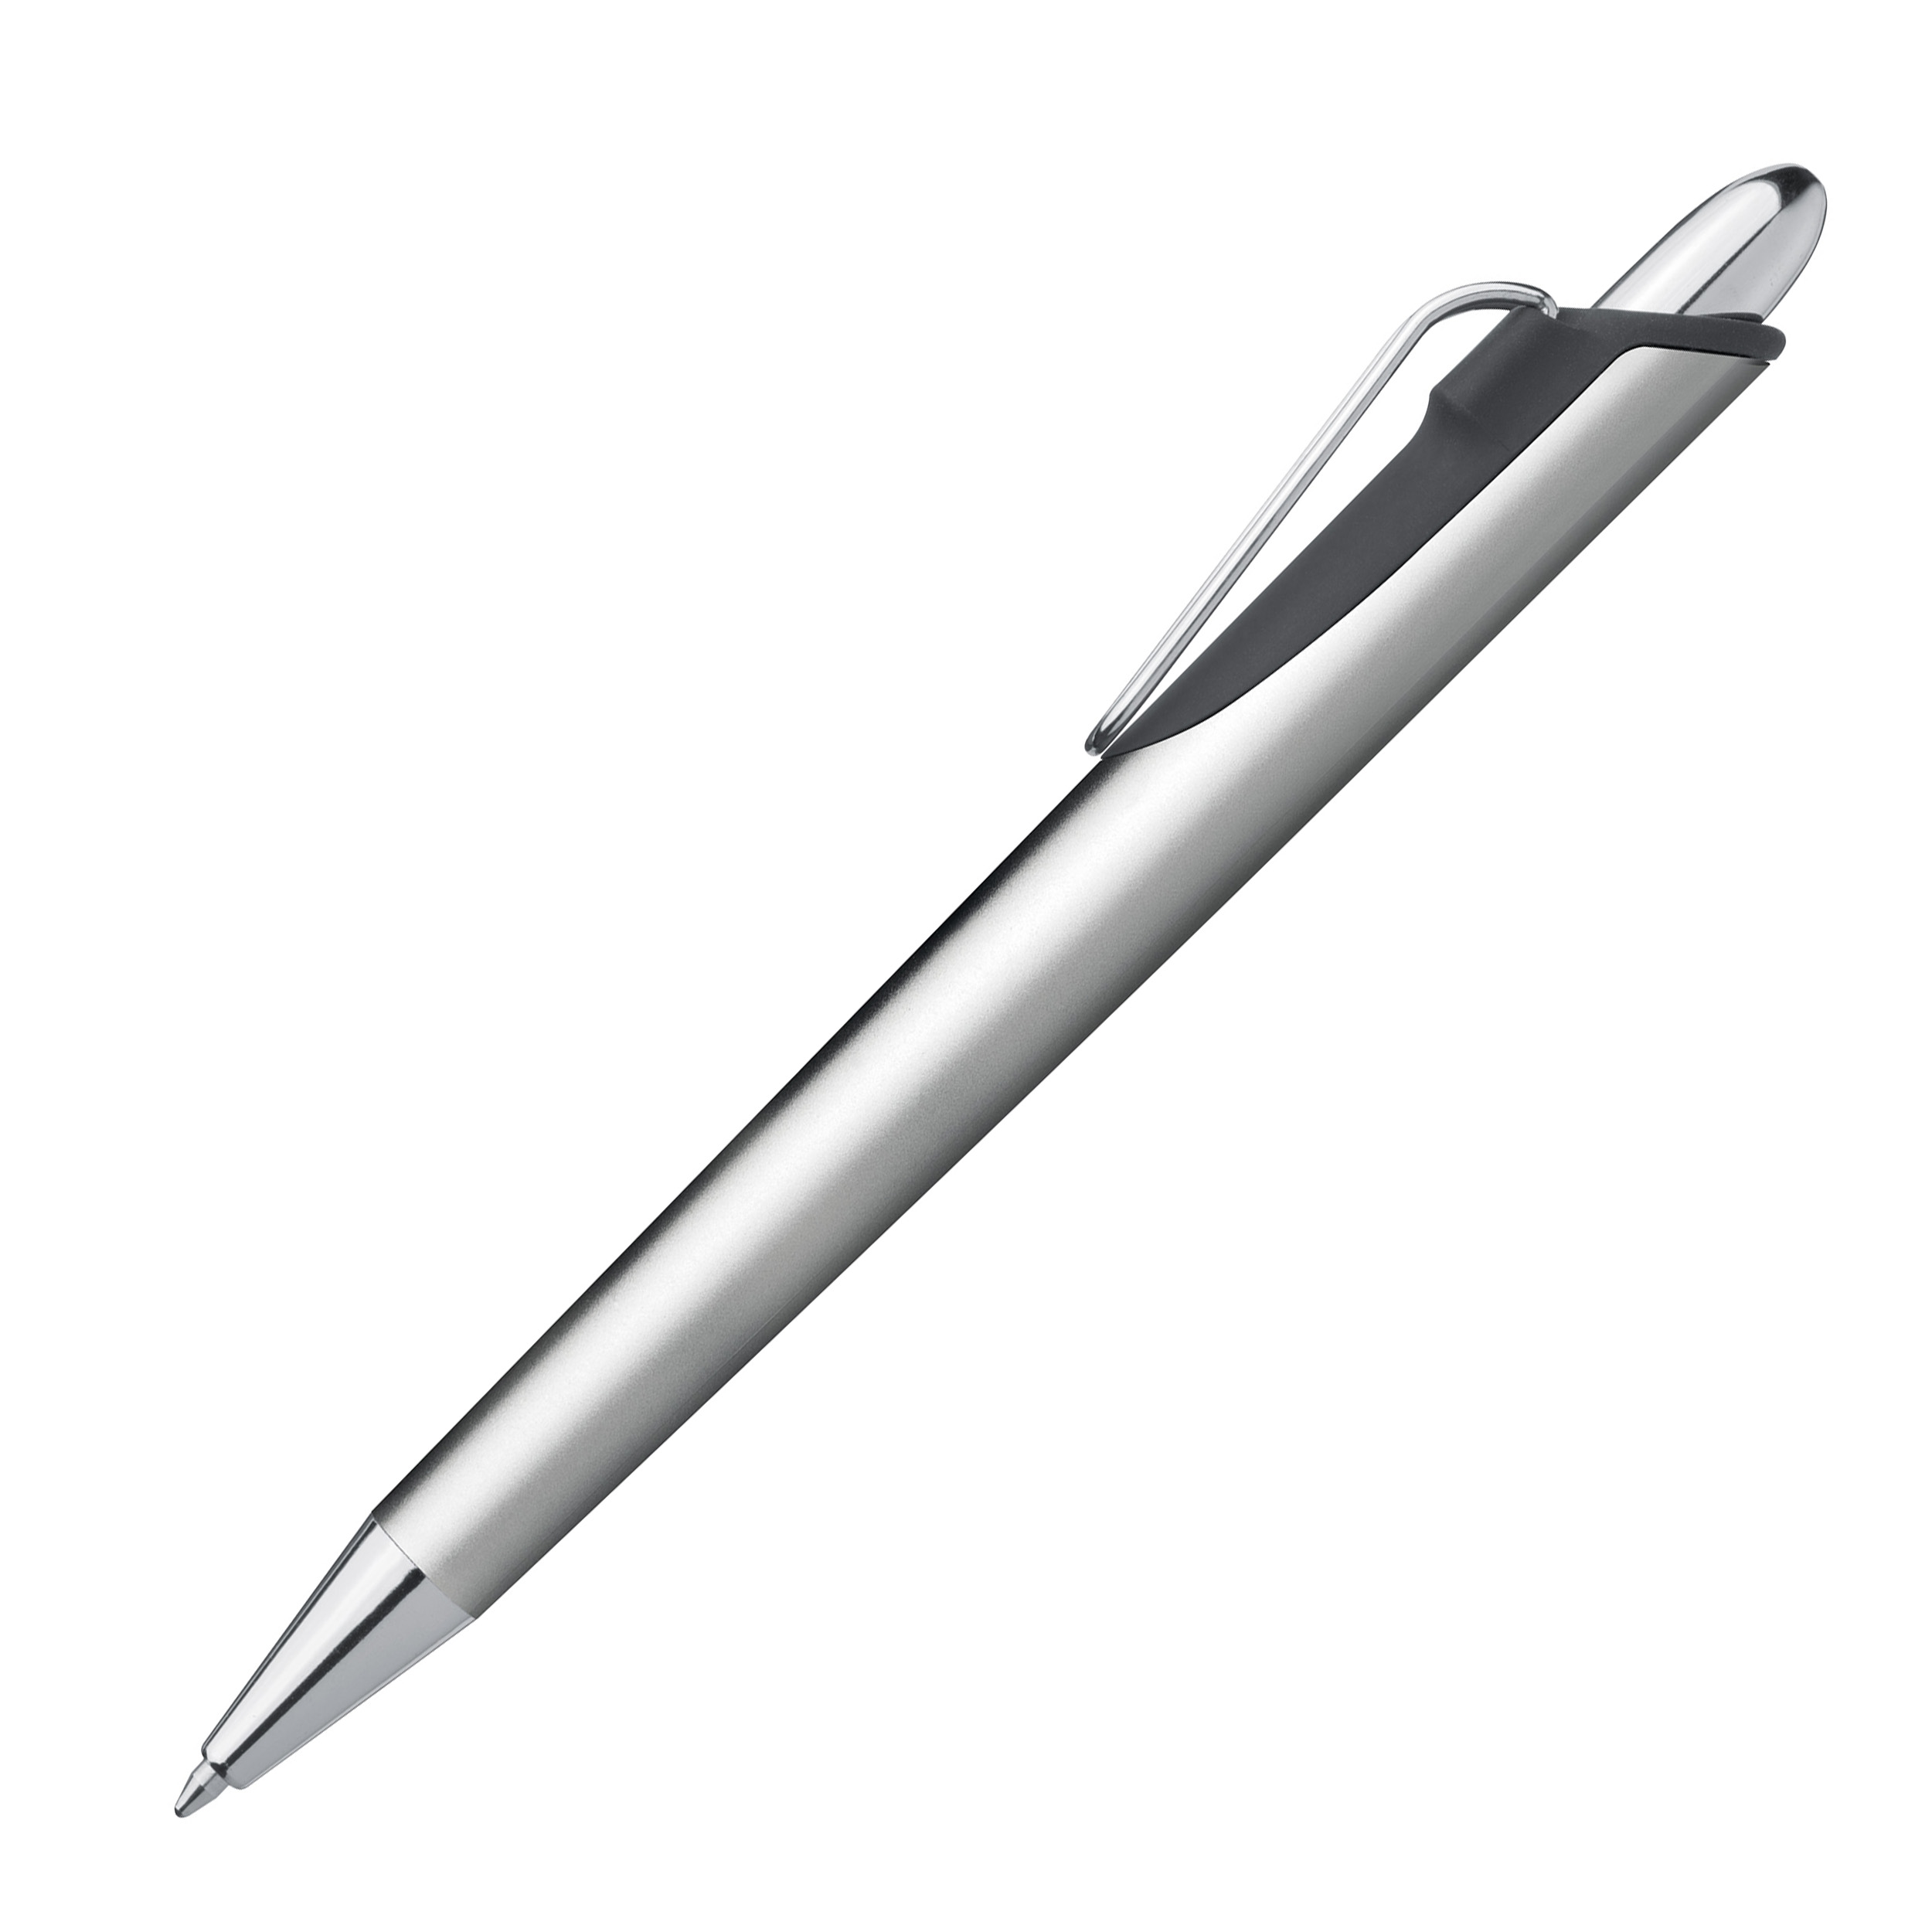 Ball pen made of plastic with metal clip